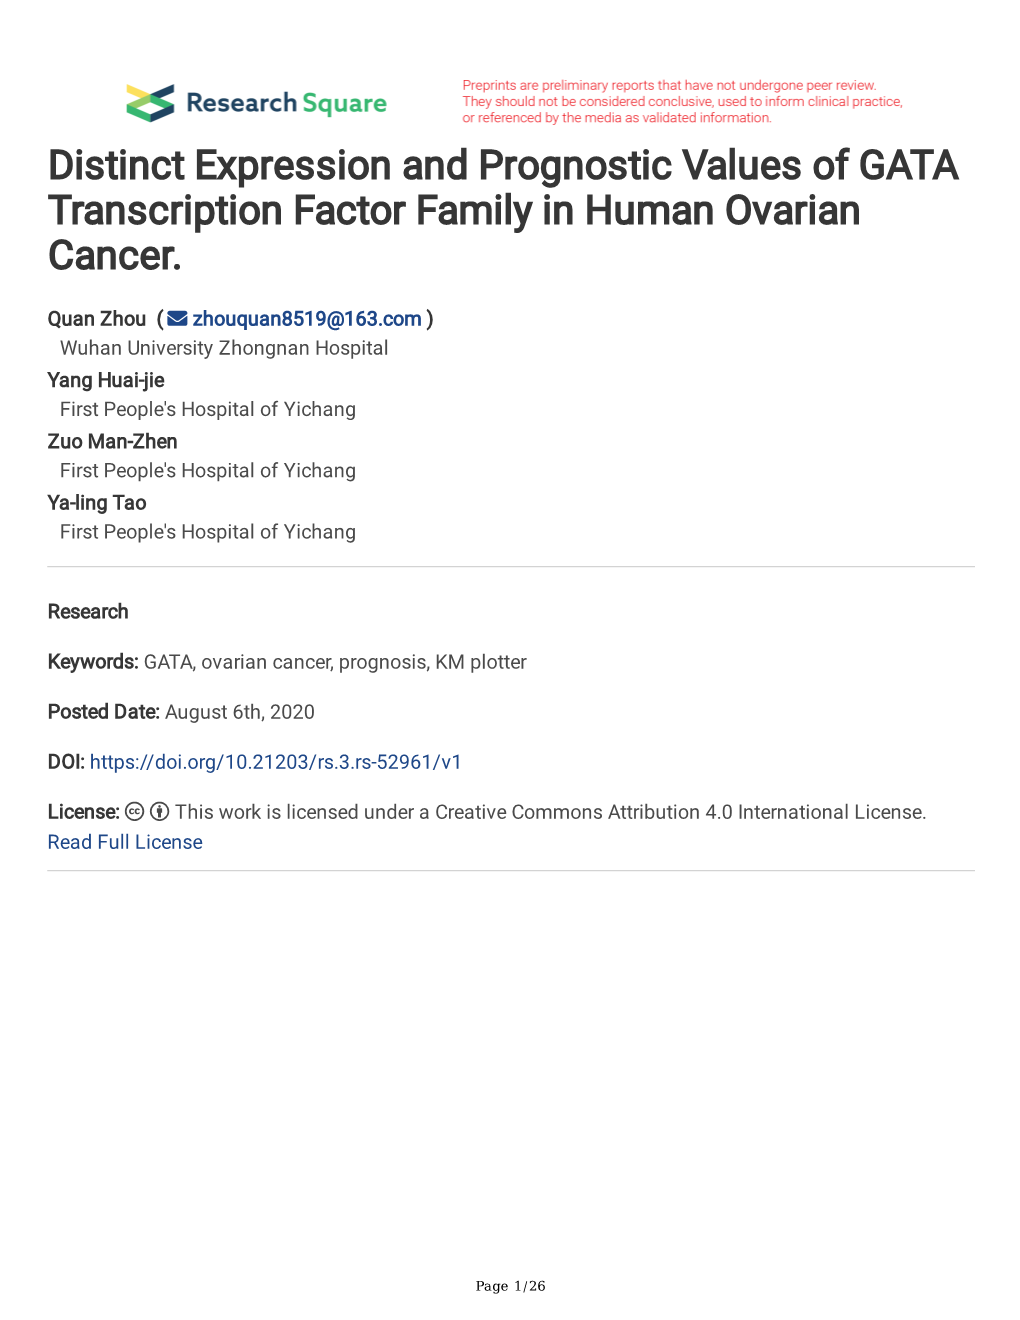 Distinct Expression and Prognostic Values of GATA Transcription Factor Family in Human Ovarian Cancer